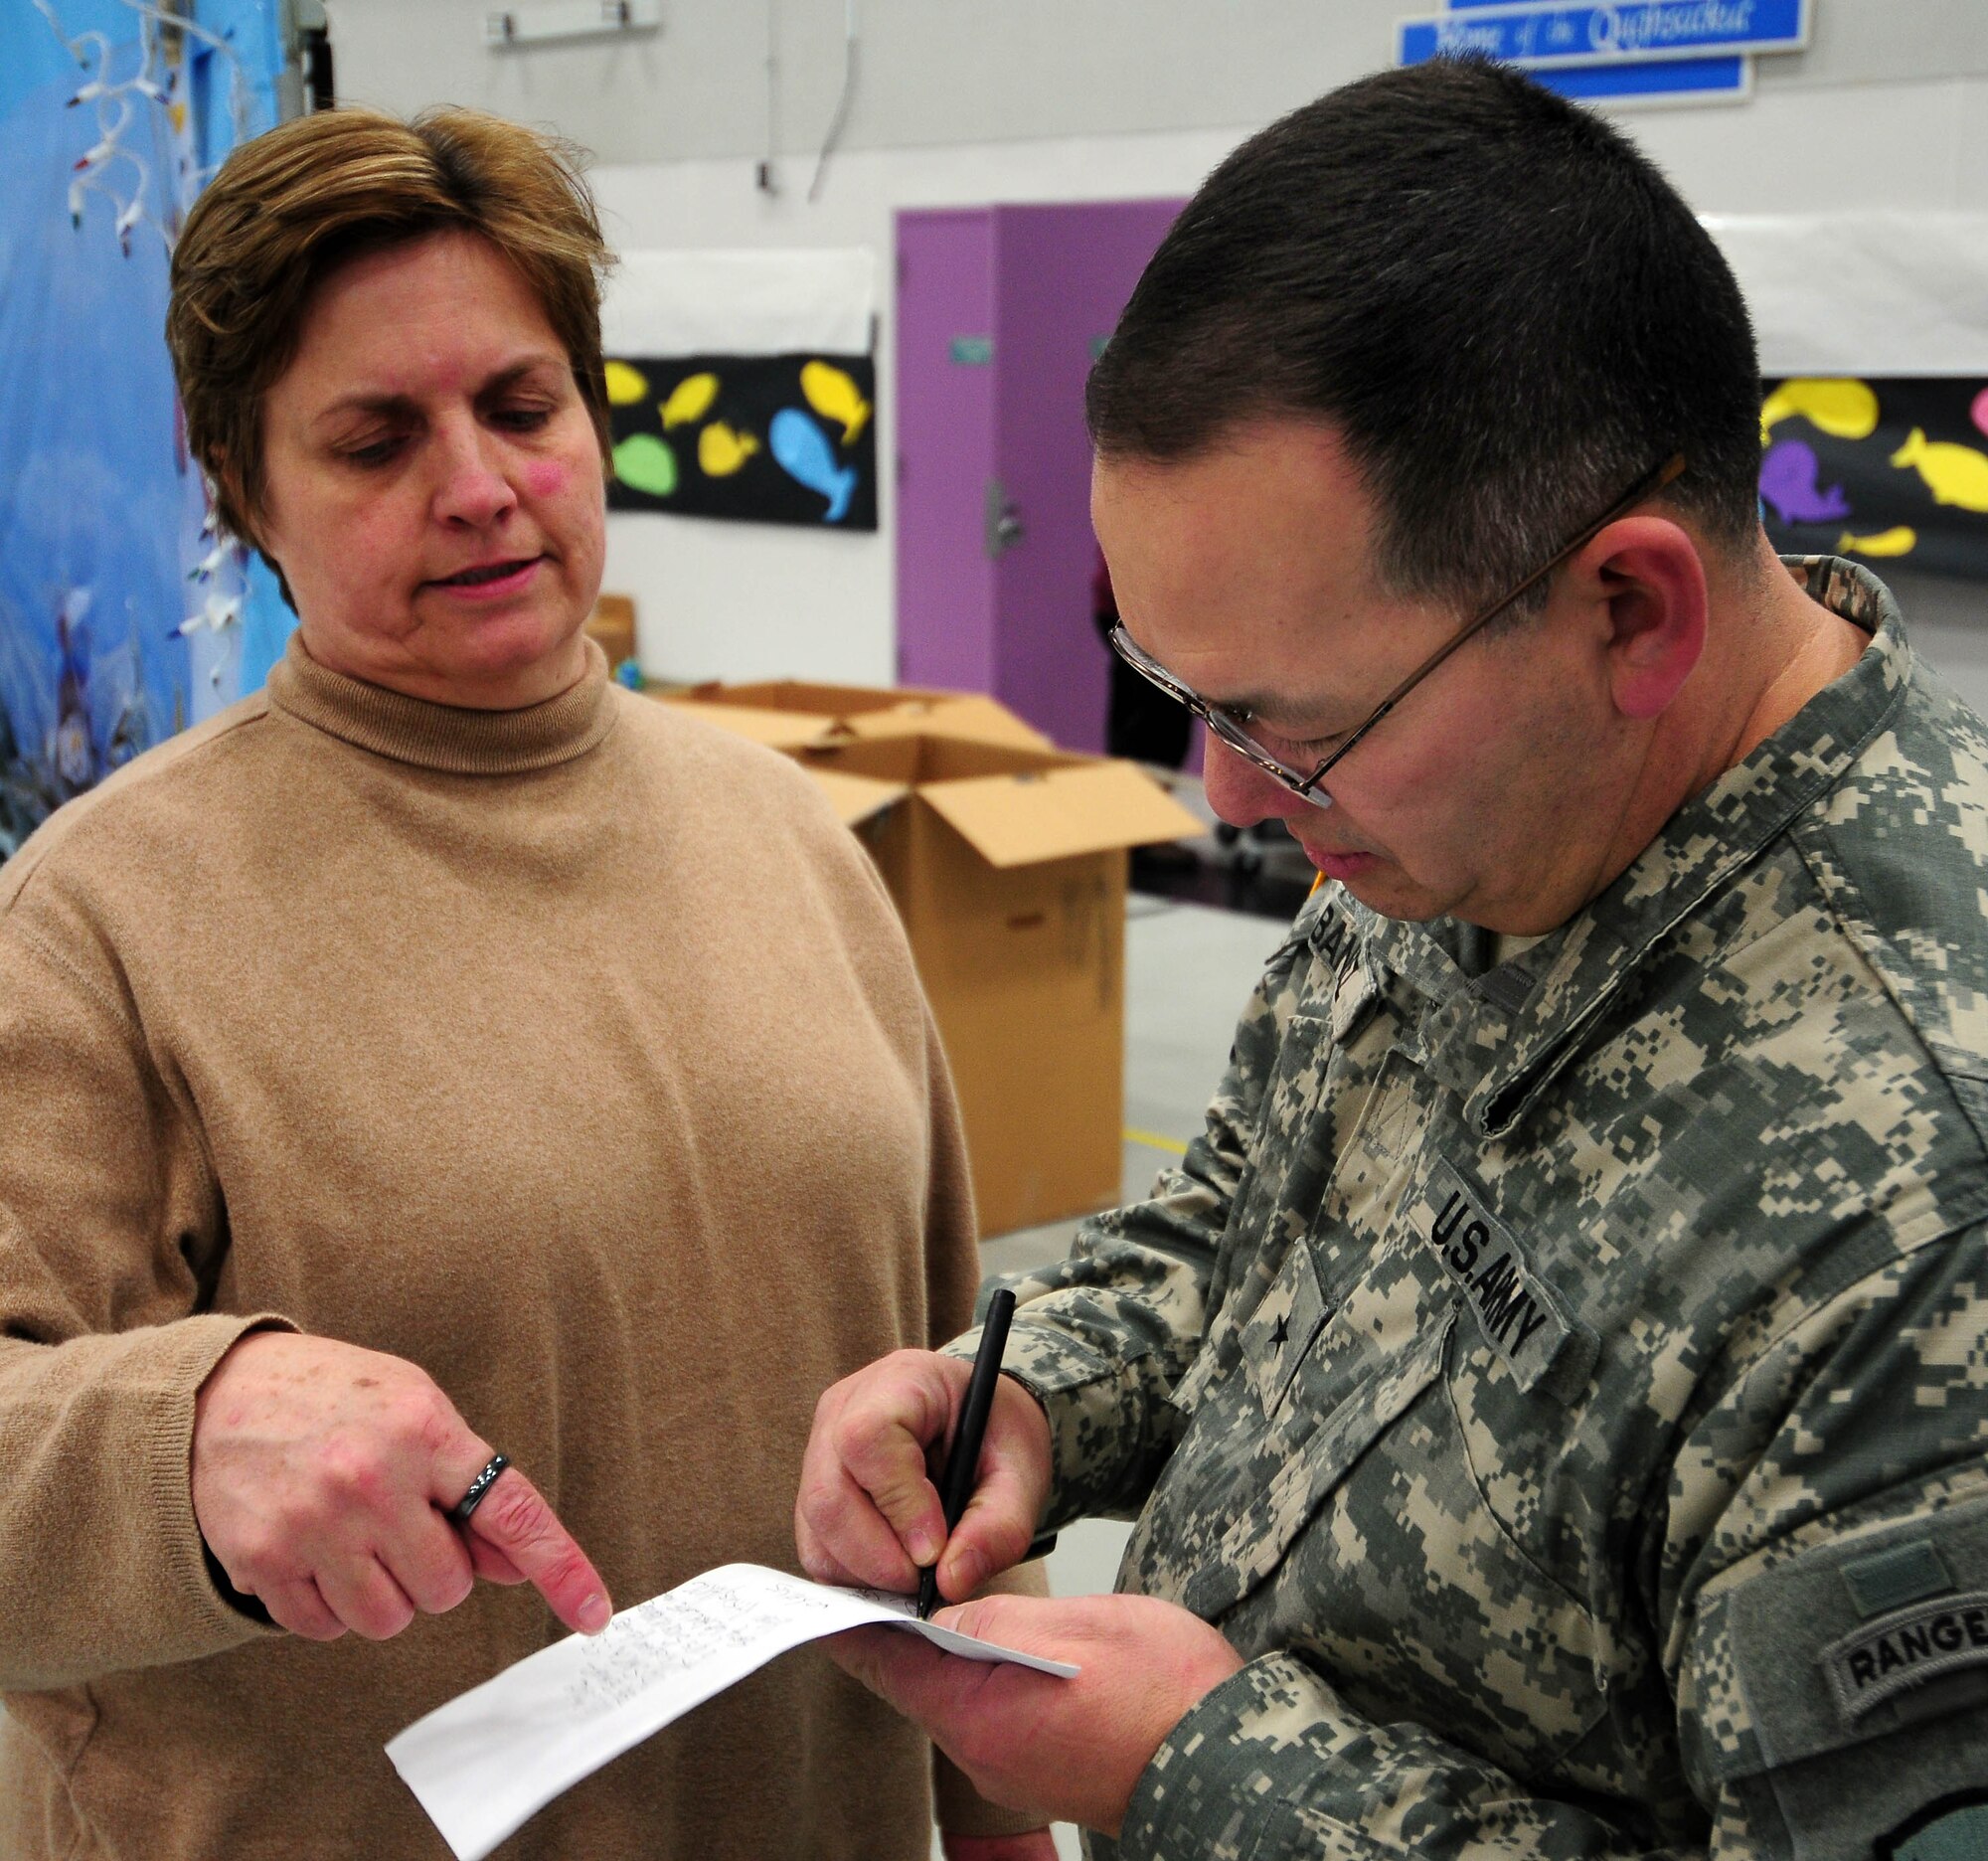 Brig. Gen. Randy Banez (right), assistant adjutant general for the Alaska Army National Guard, prepares short remarks for schoolchildren at Gambell Public School with help from Jan Meyers, the Alaska National Guard's state family programs director. The Alaska Air and Army National Guard were in Gambell, on remote St. Lawrence Island in the Bering Sea, with a group of civilian volunteers on Dec. 16, 2009 as part of Operation Santa Claus. Now in its 53rd year, Operation Santa Claus is a program of the Alaska National Guard to bring toys, food, supplies and Christmas cheer to isolated villages around the state. Alaska Air National Guard photo by 1st. Lt. John Callahan.